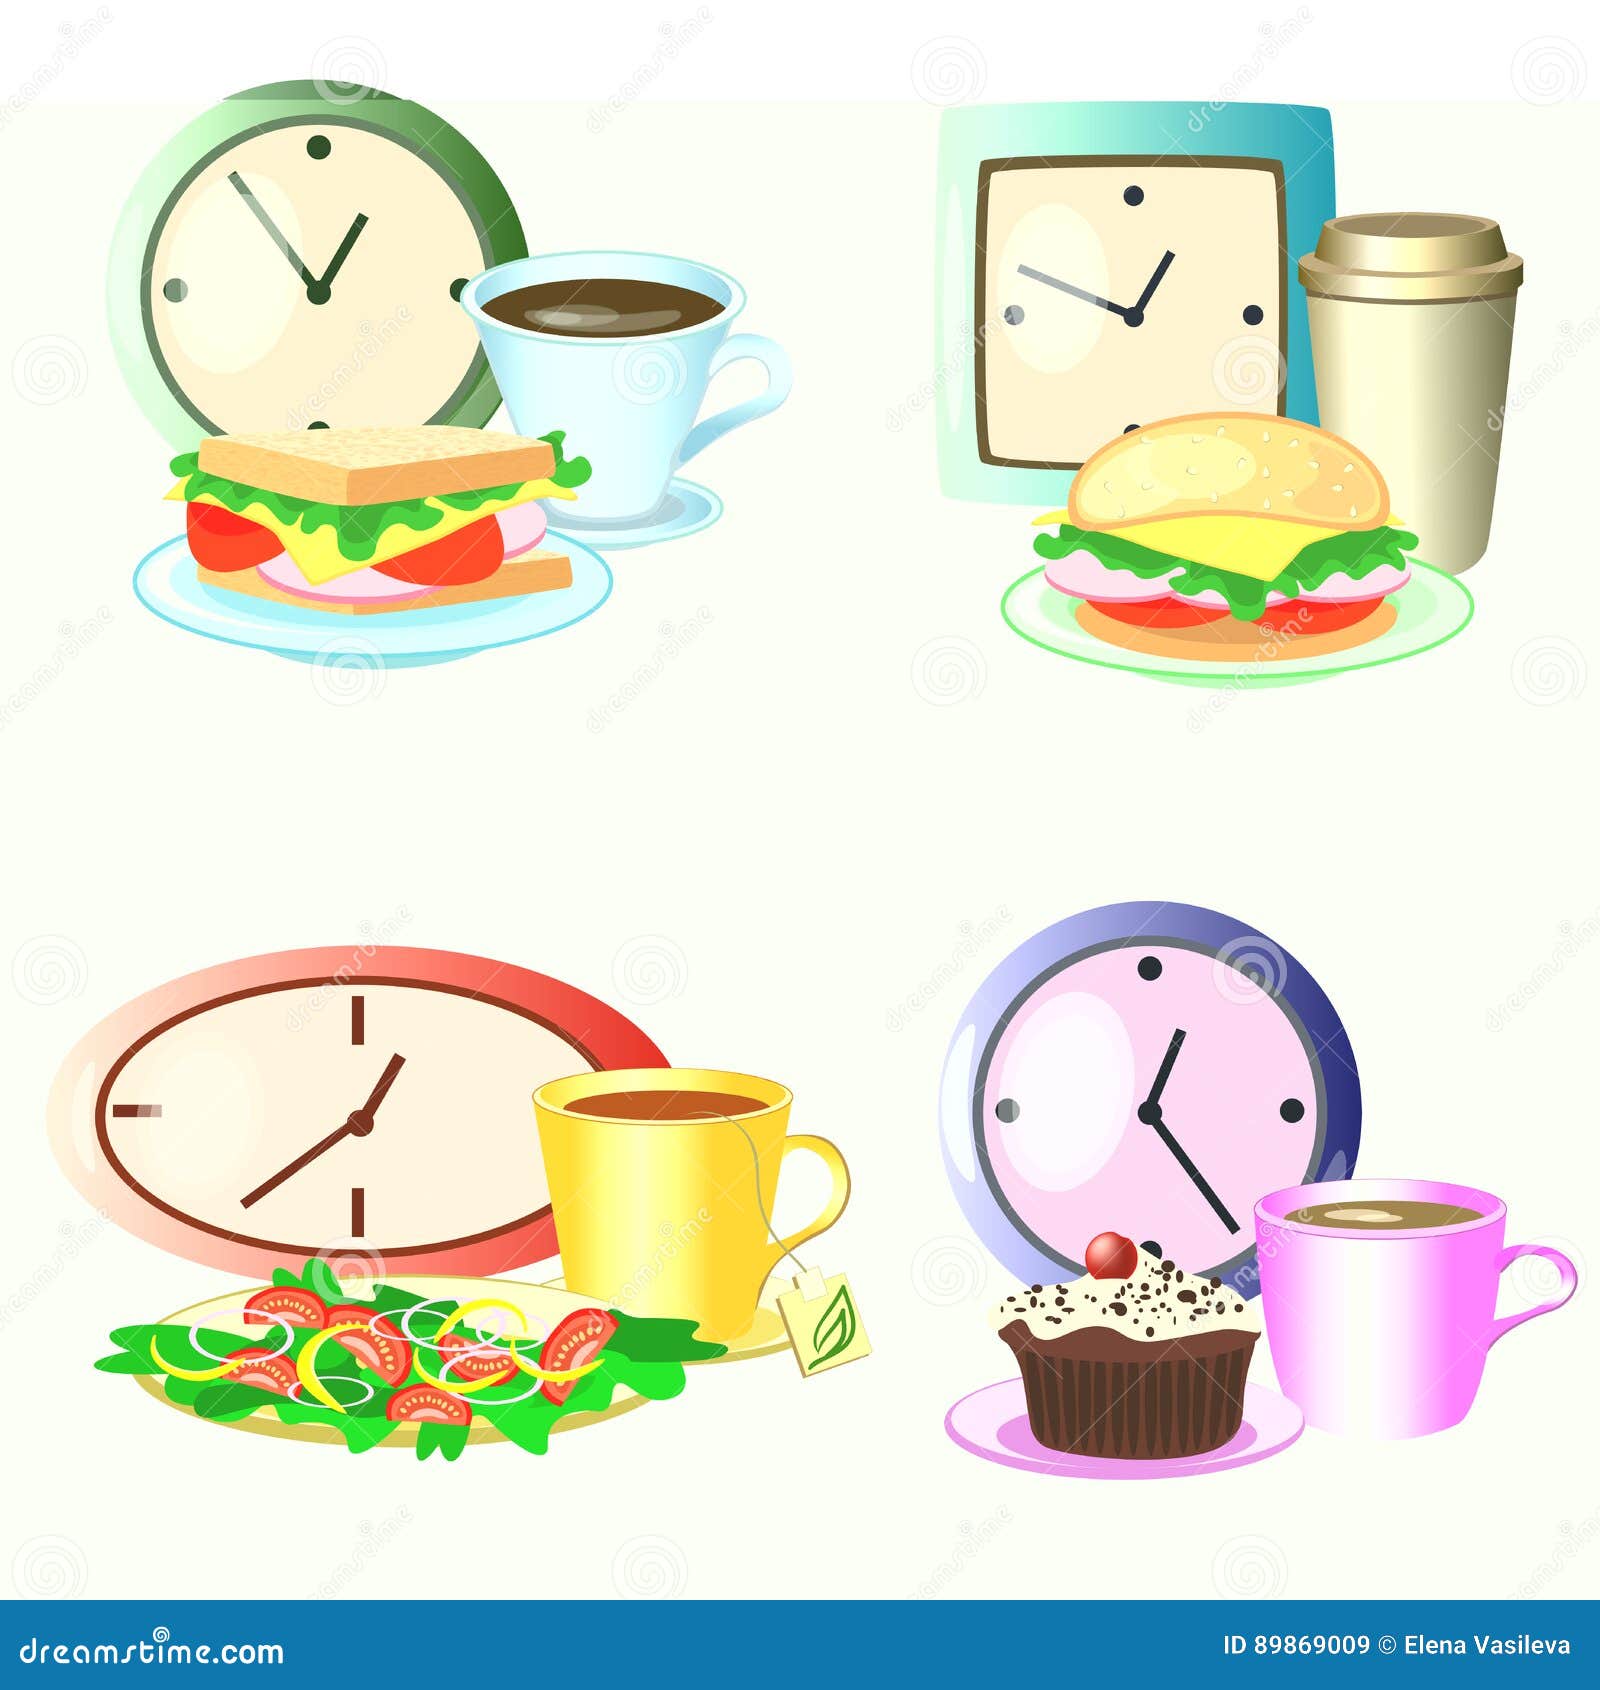 Illustration about Vector sets of business or school foods, lunch time. 